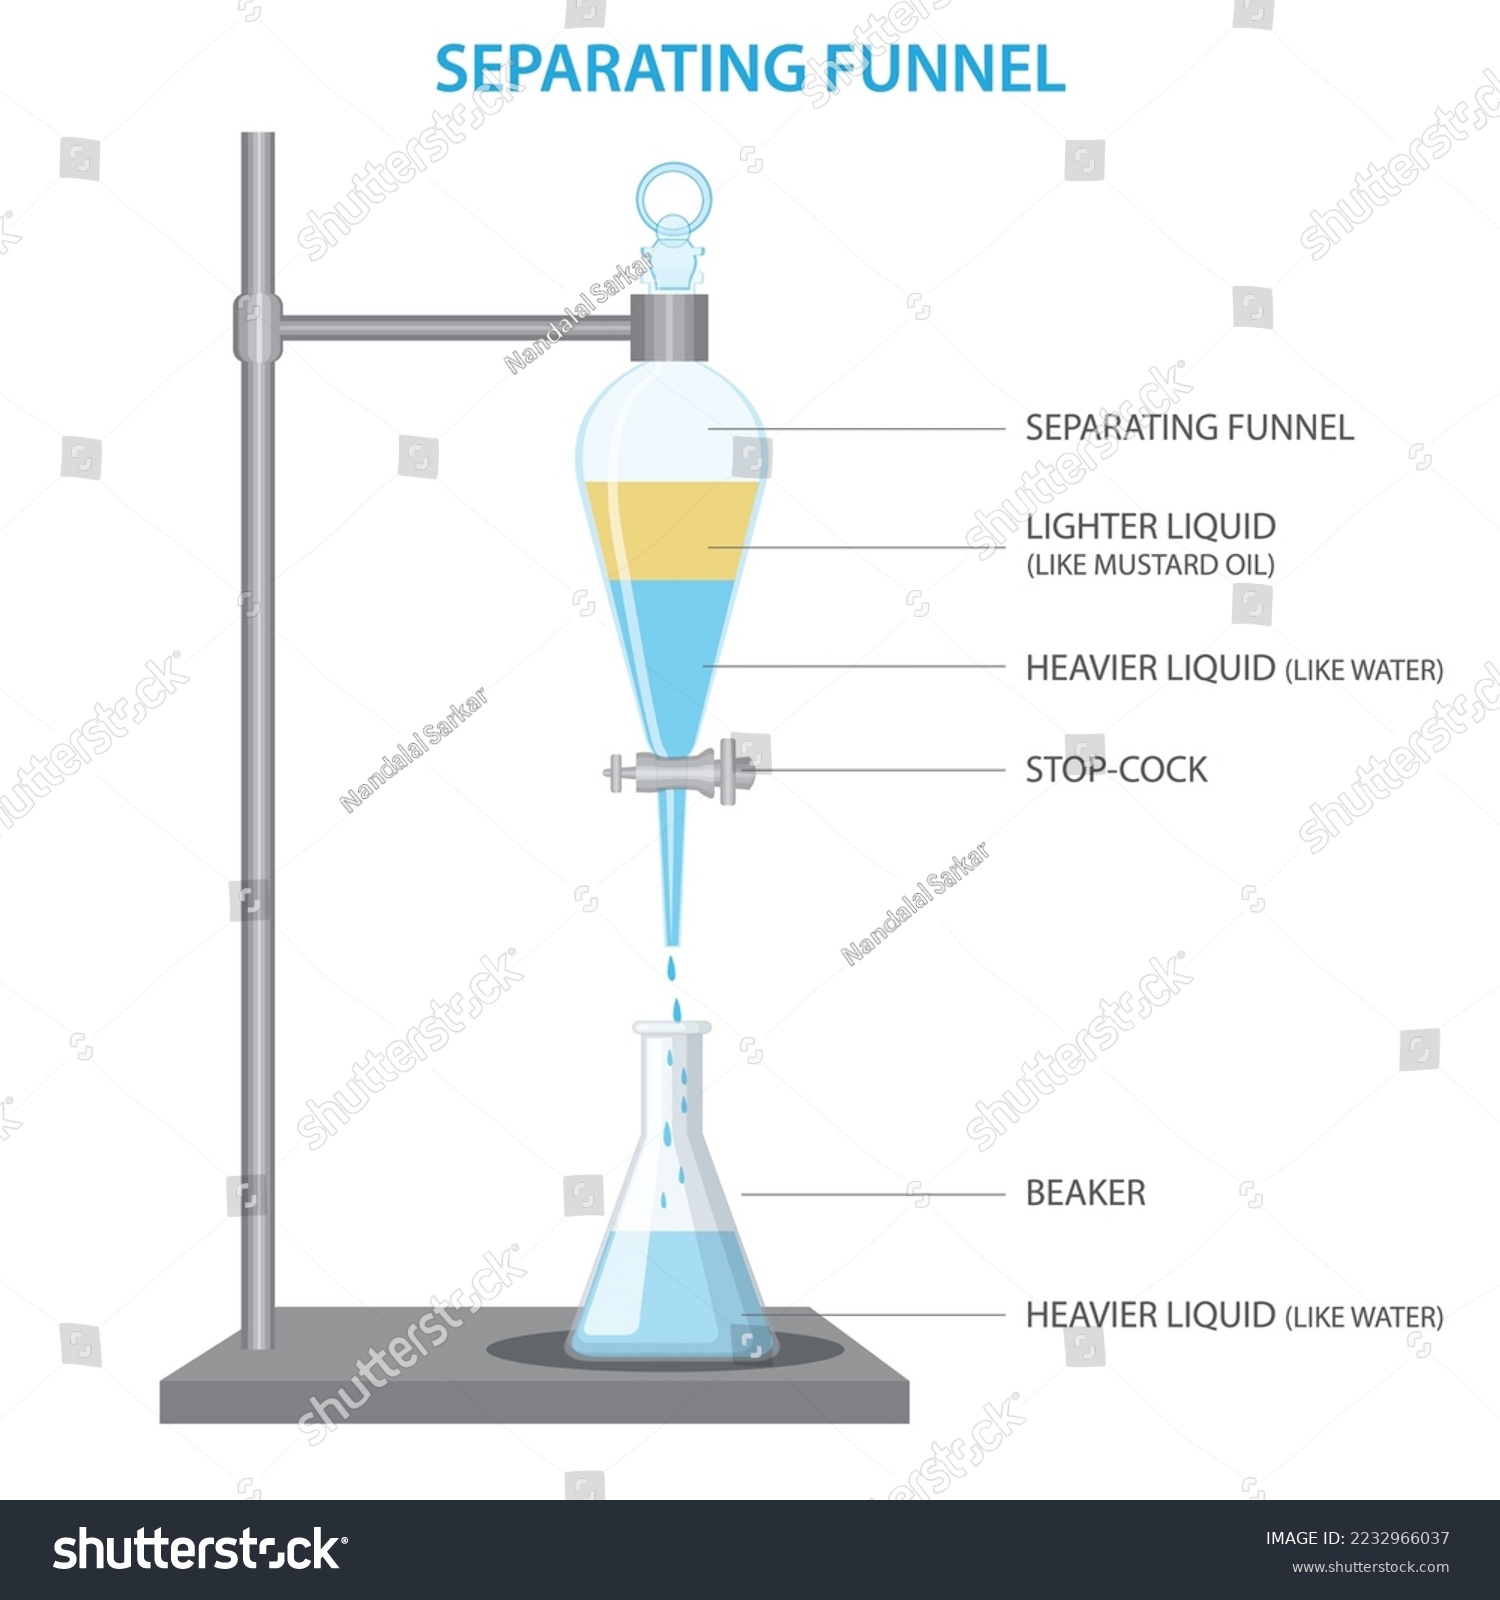 separating funnel laboratory glassware used in liquid-liquid extractions to separate or partition the components of a mixture into two immiscible solvent phases of different densities.  #2232966037